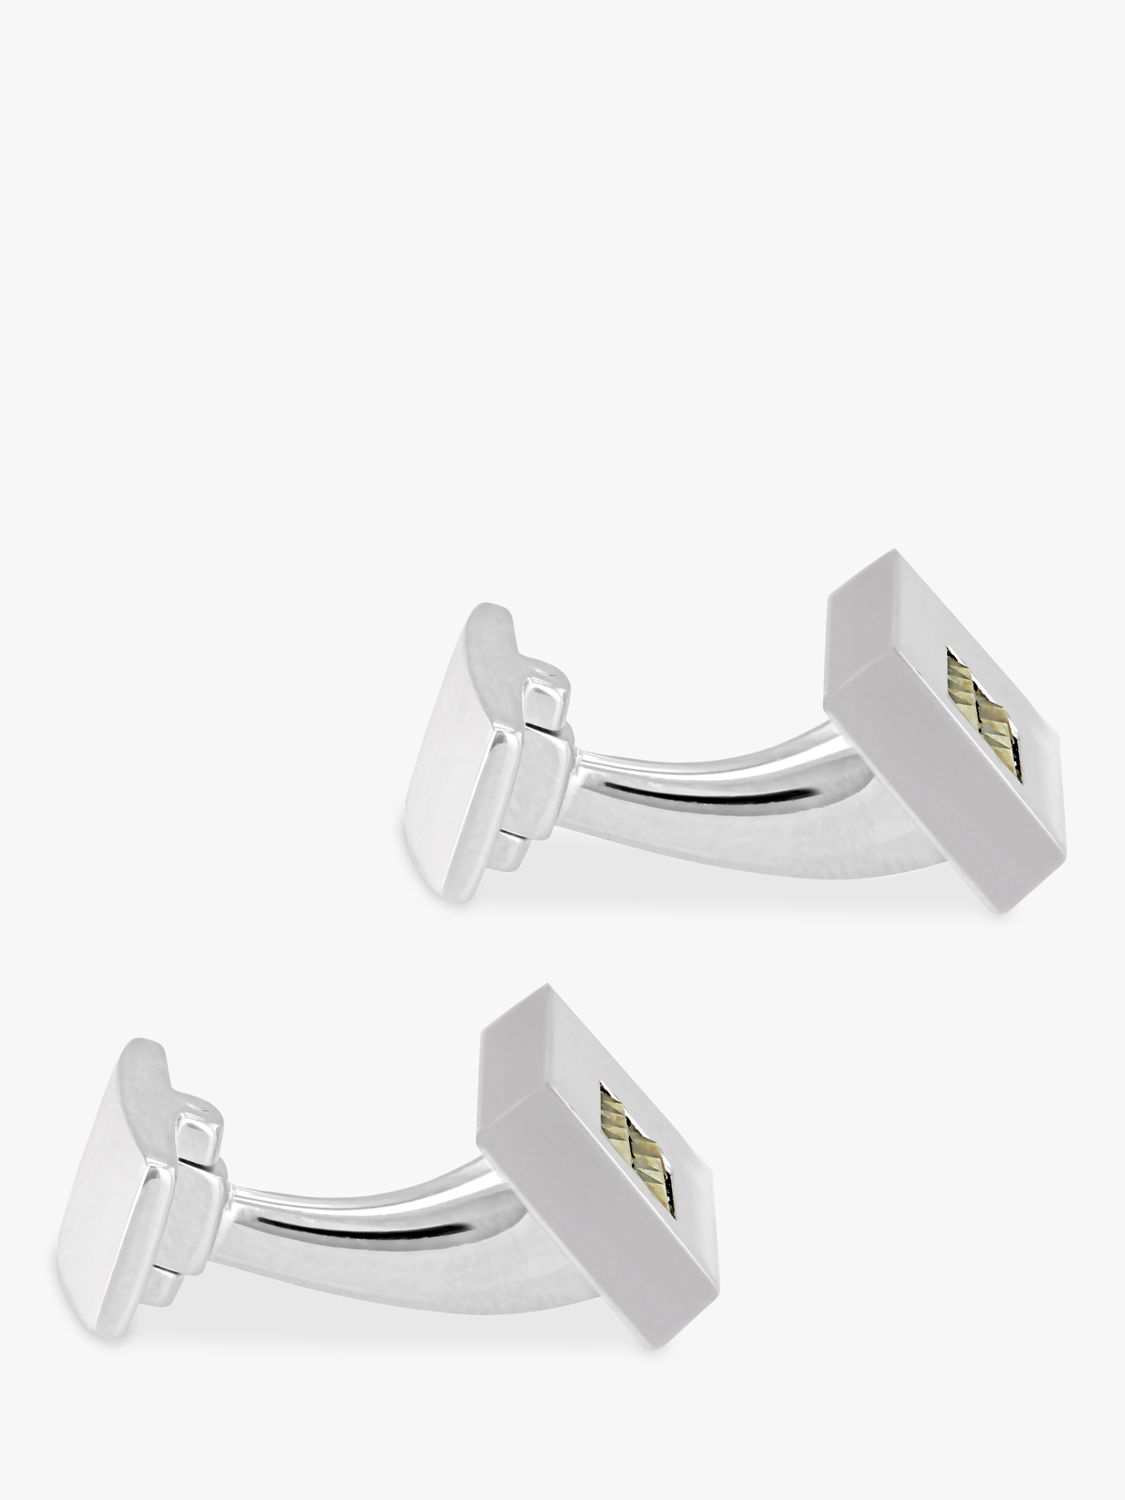 Buy Hoxton London Pyramid Marcasite Set Rectangle Cufflinks, Silver Online at johnlewis.com